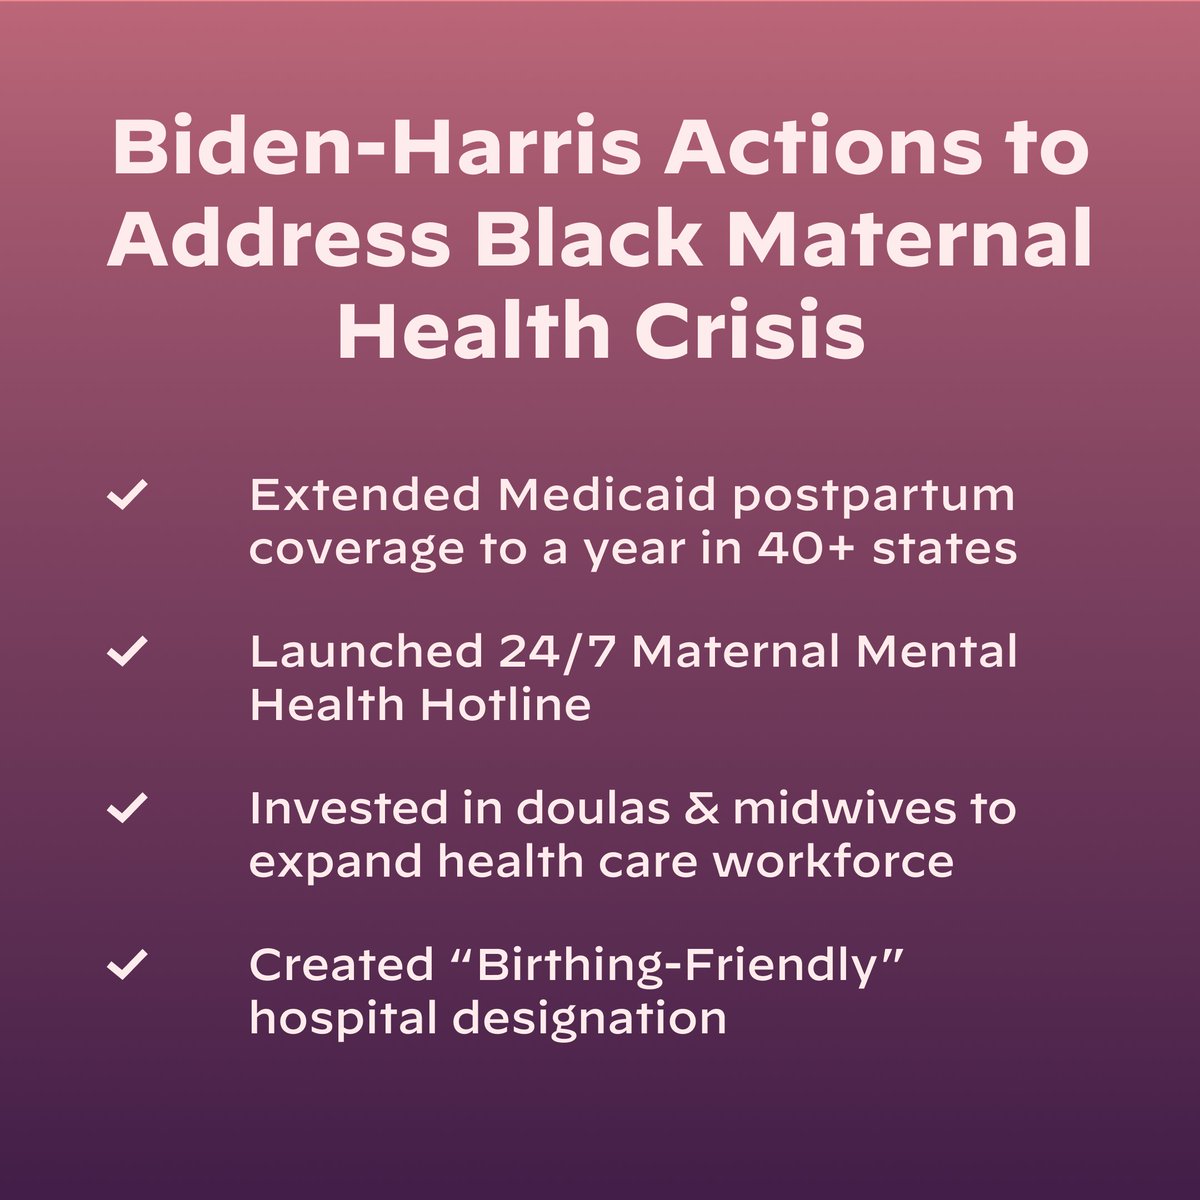 During Black Maternal Health Week and every day, President Biden and I will continue to uplift this crisis and commit to taking urgent action to protect our nation's mothers and families.